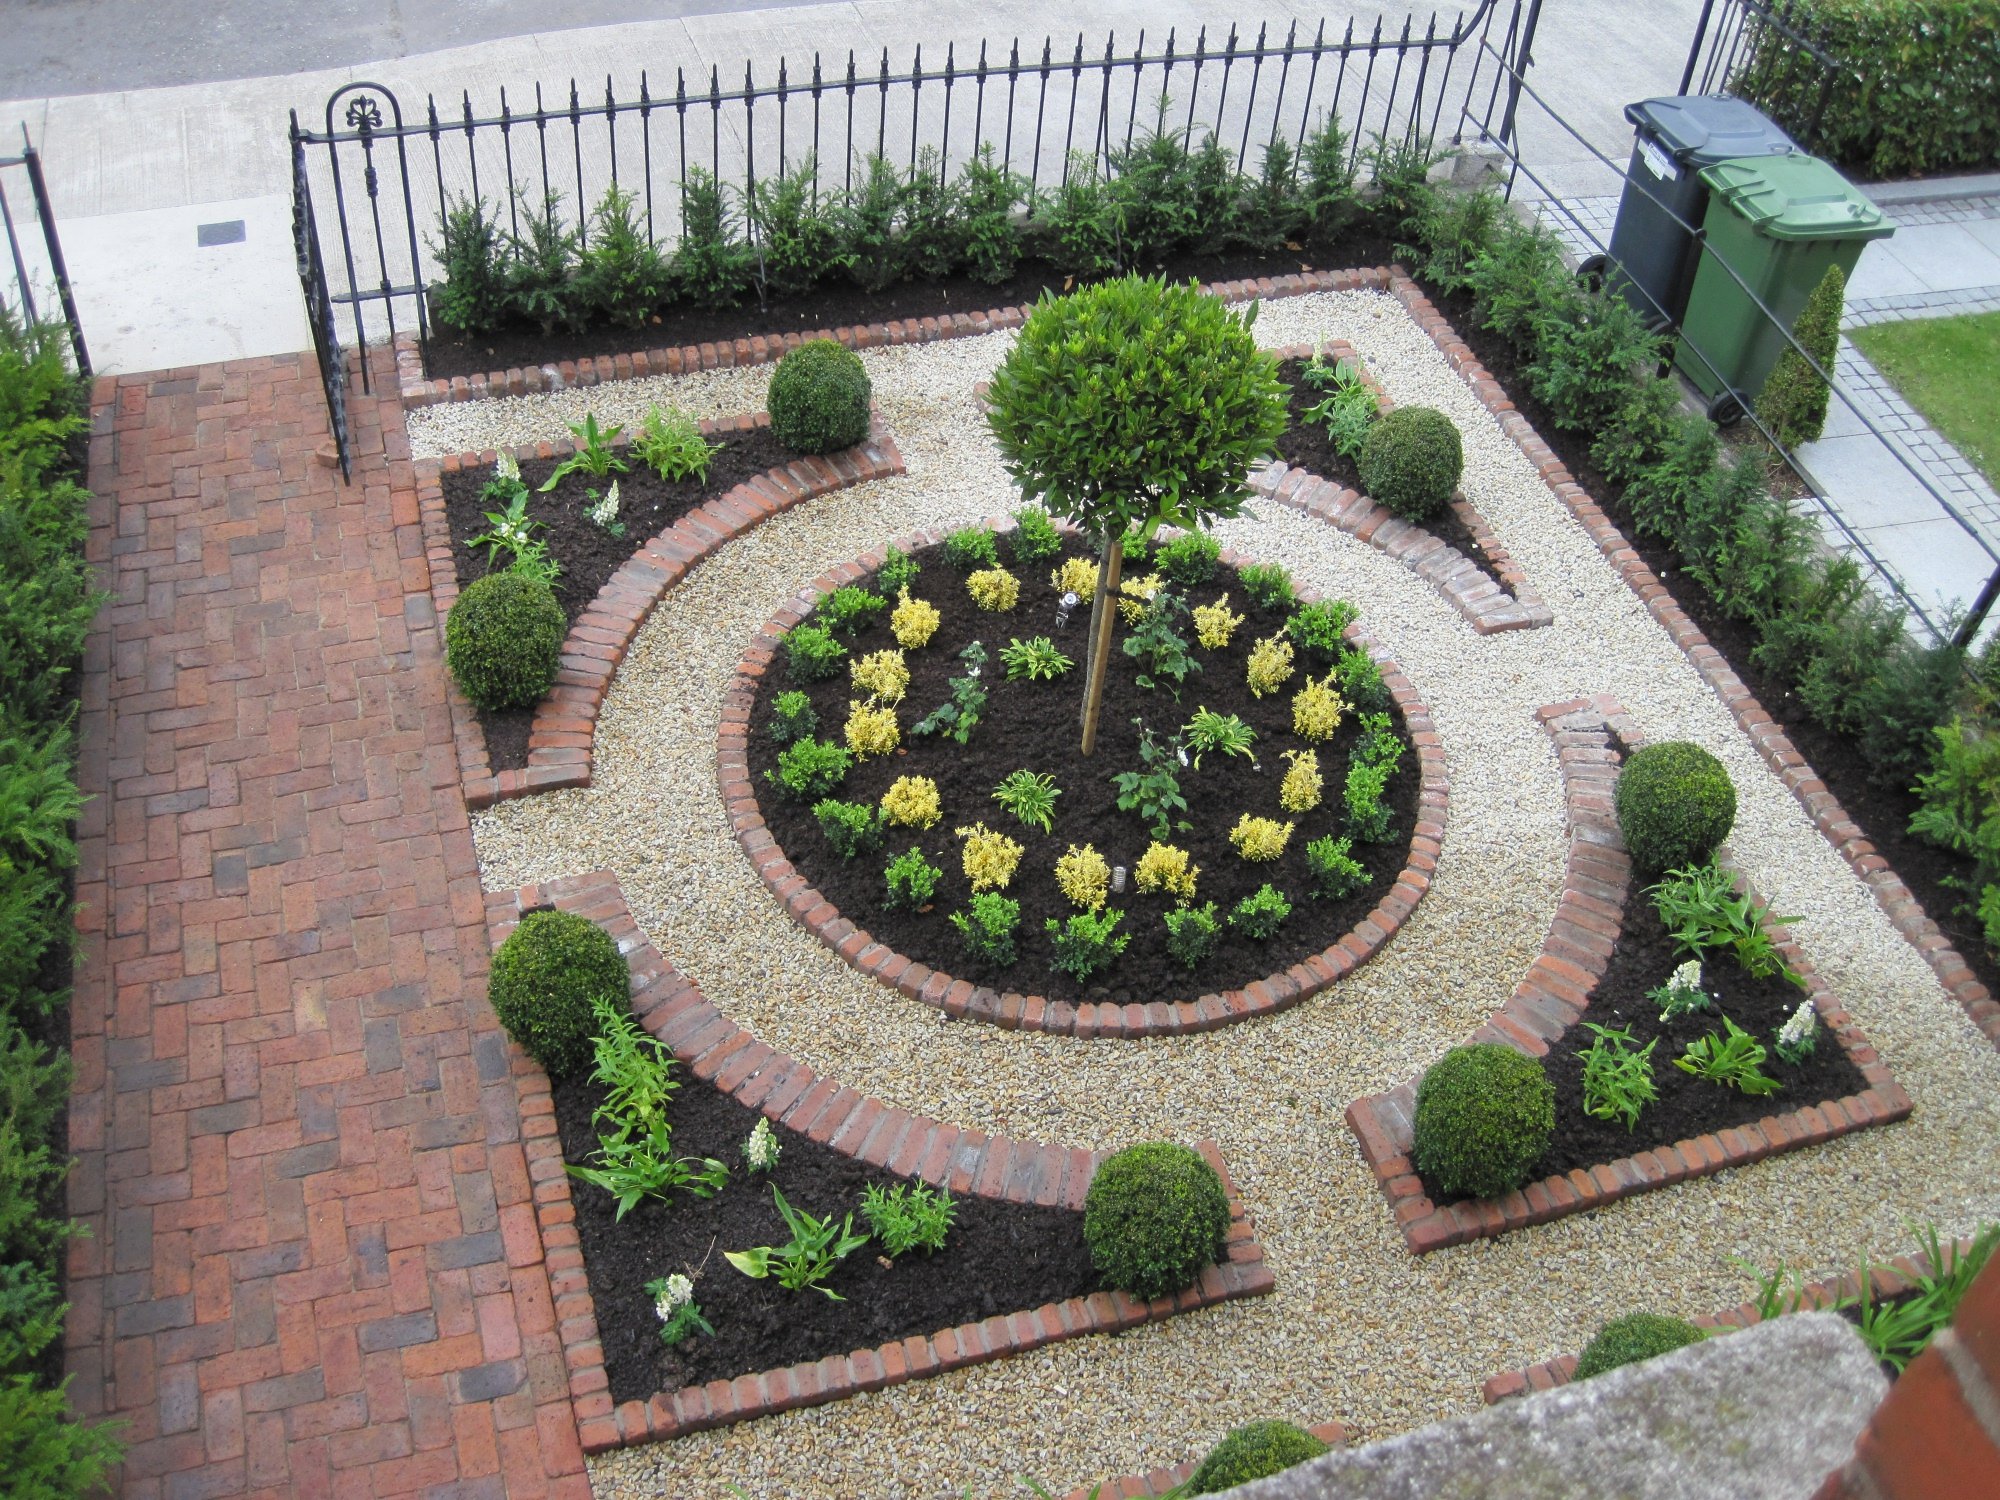  front yard garden designs and layouts